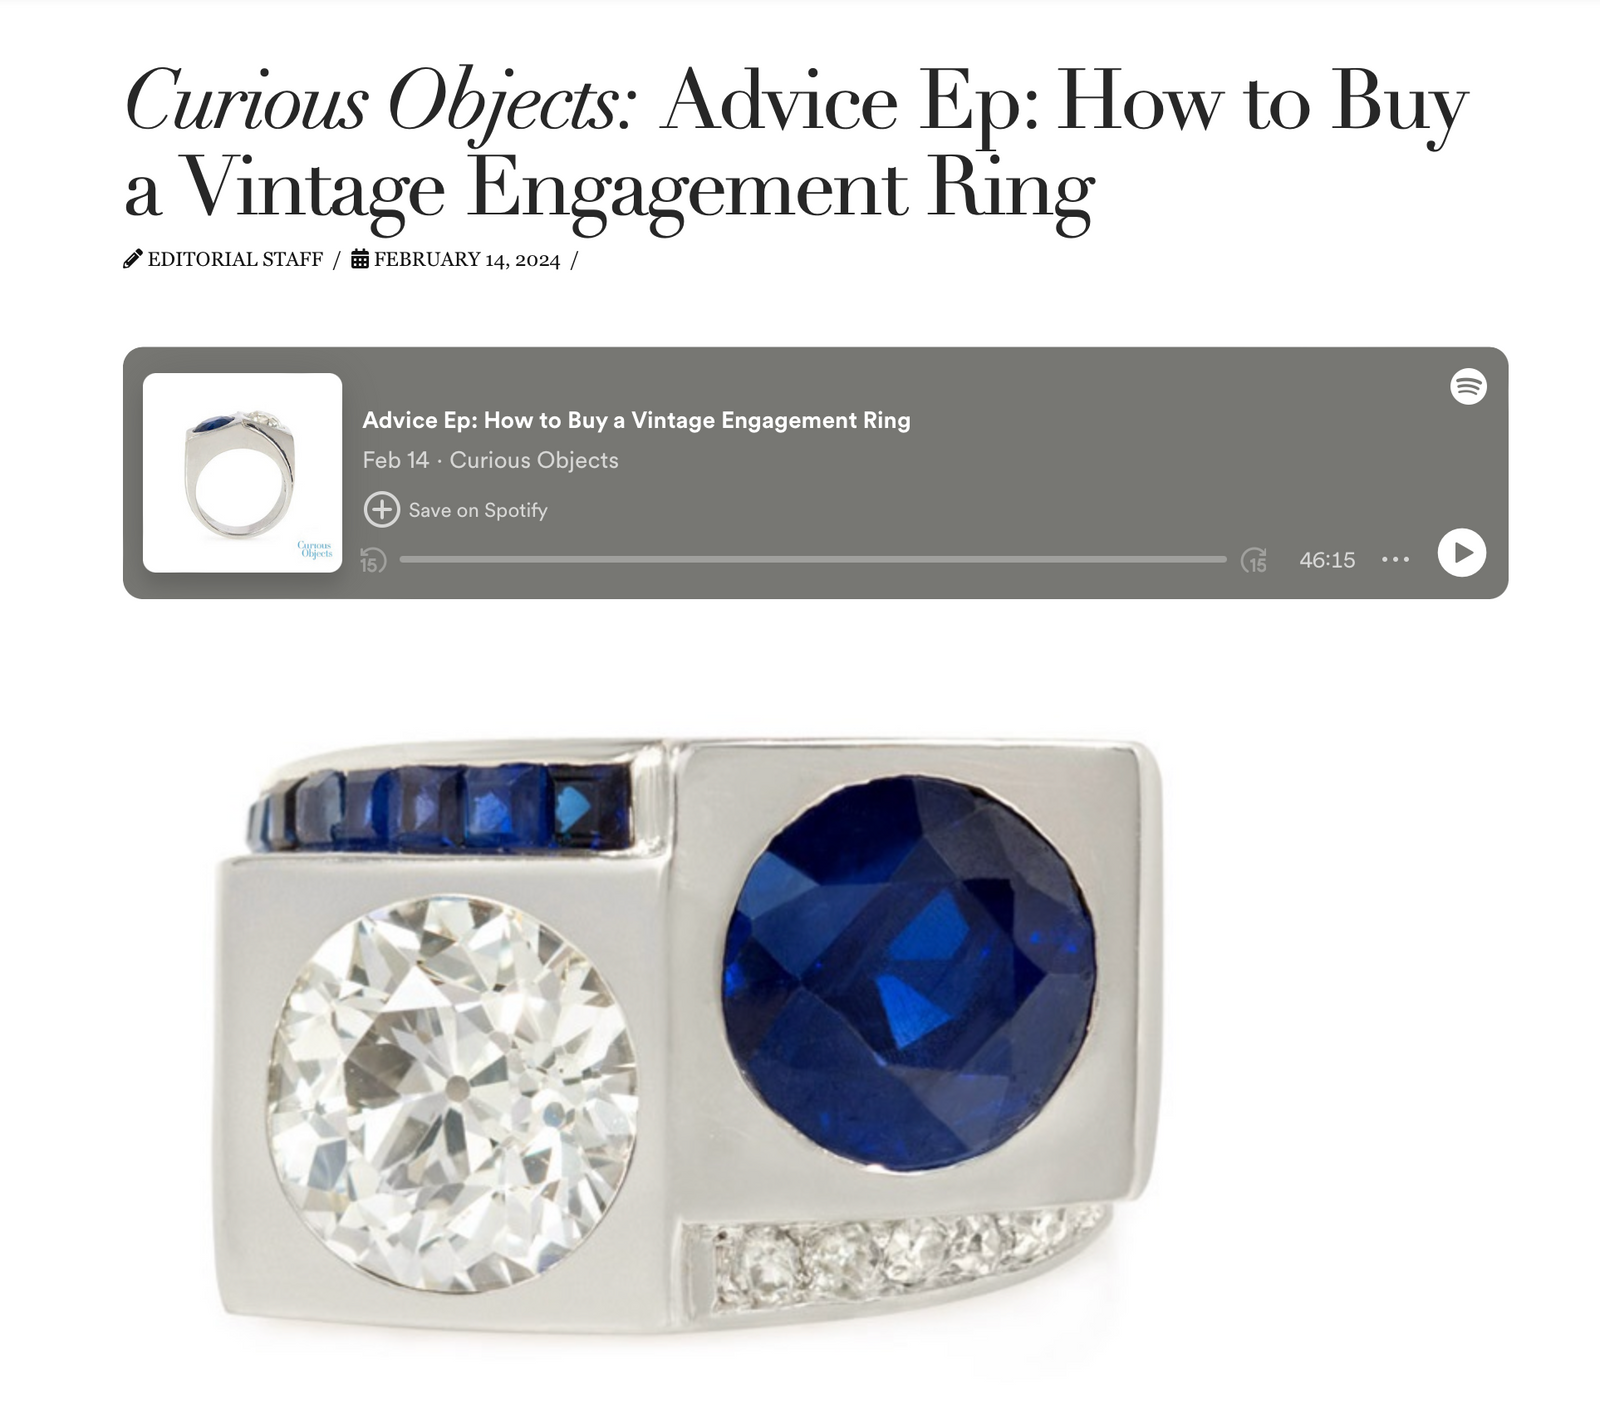 Matthew Imberman Talks to the Curious Objects Podcast About How to Buy a Vintage Engagement Ring